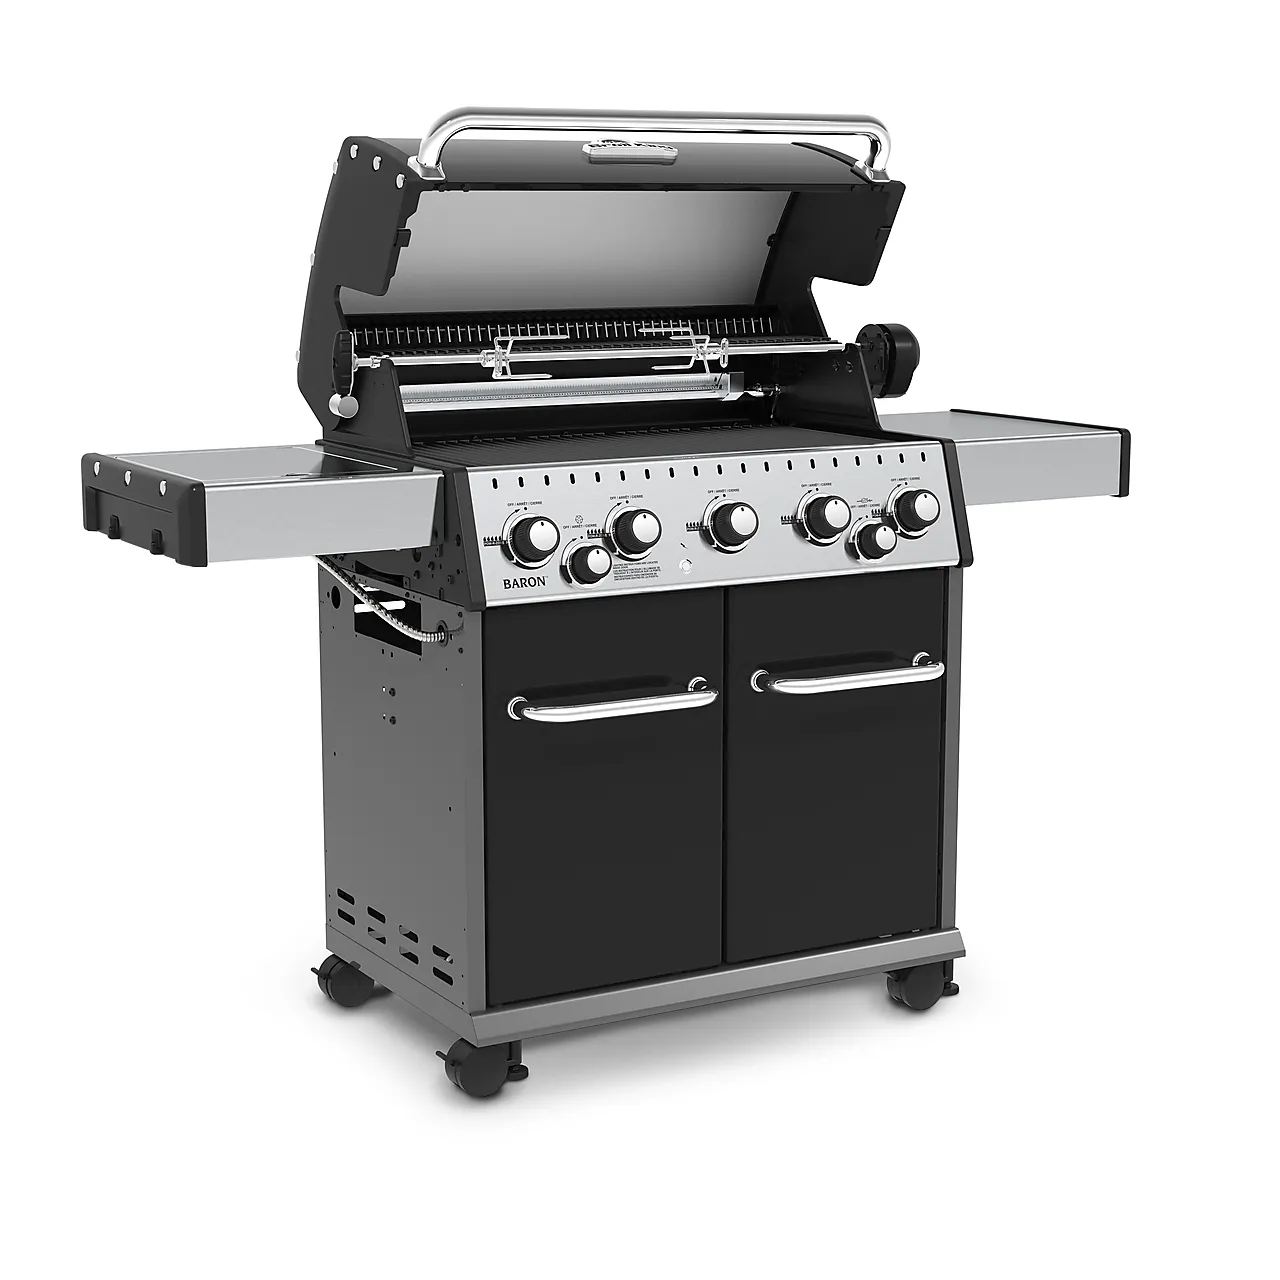 Gassgrill baron 590 null - null - 5